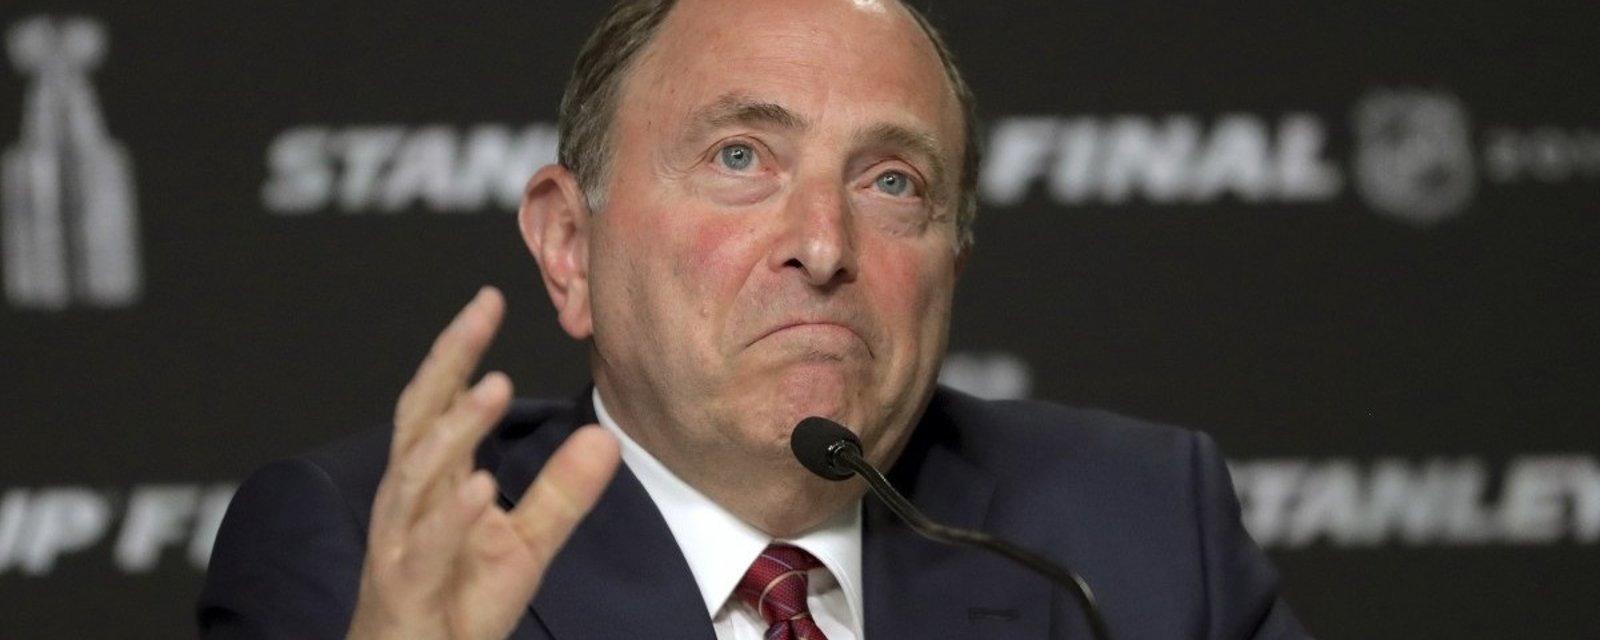 NHL games in danger of being cancelled over the weekend.